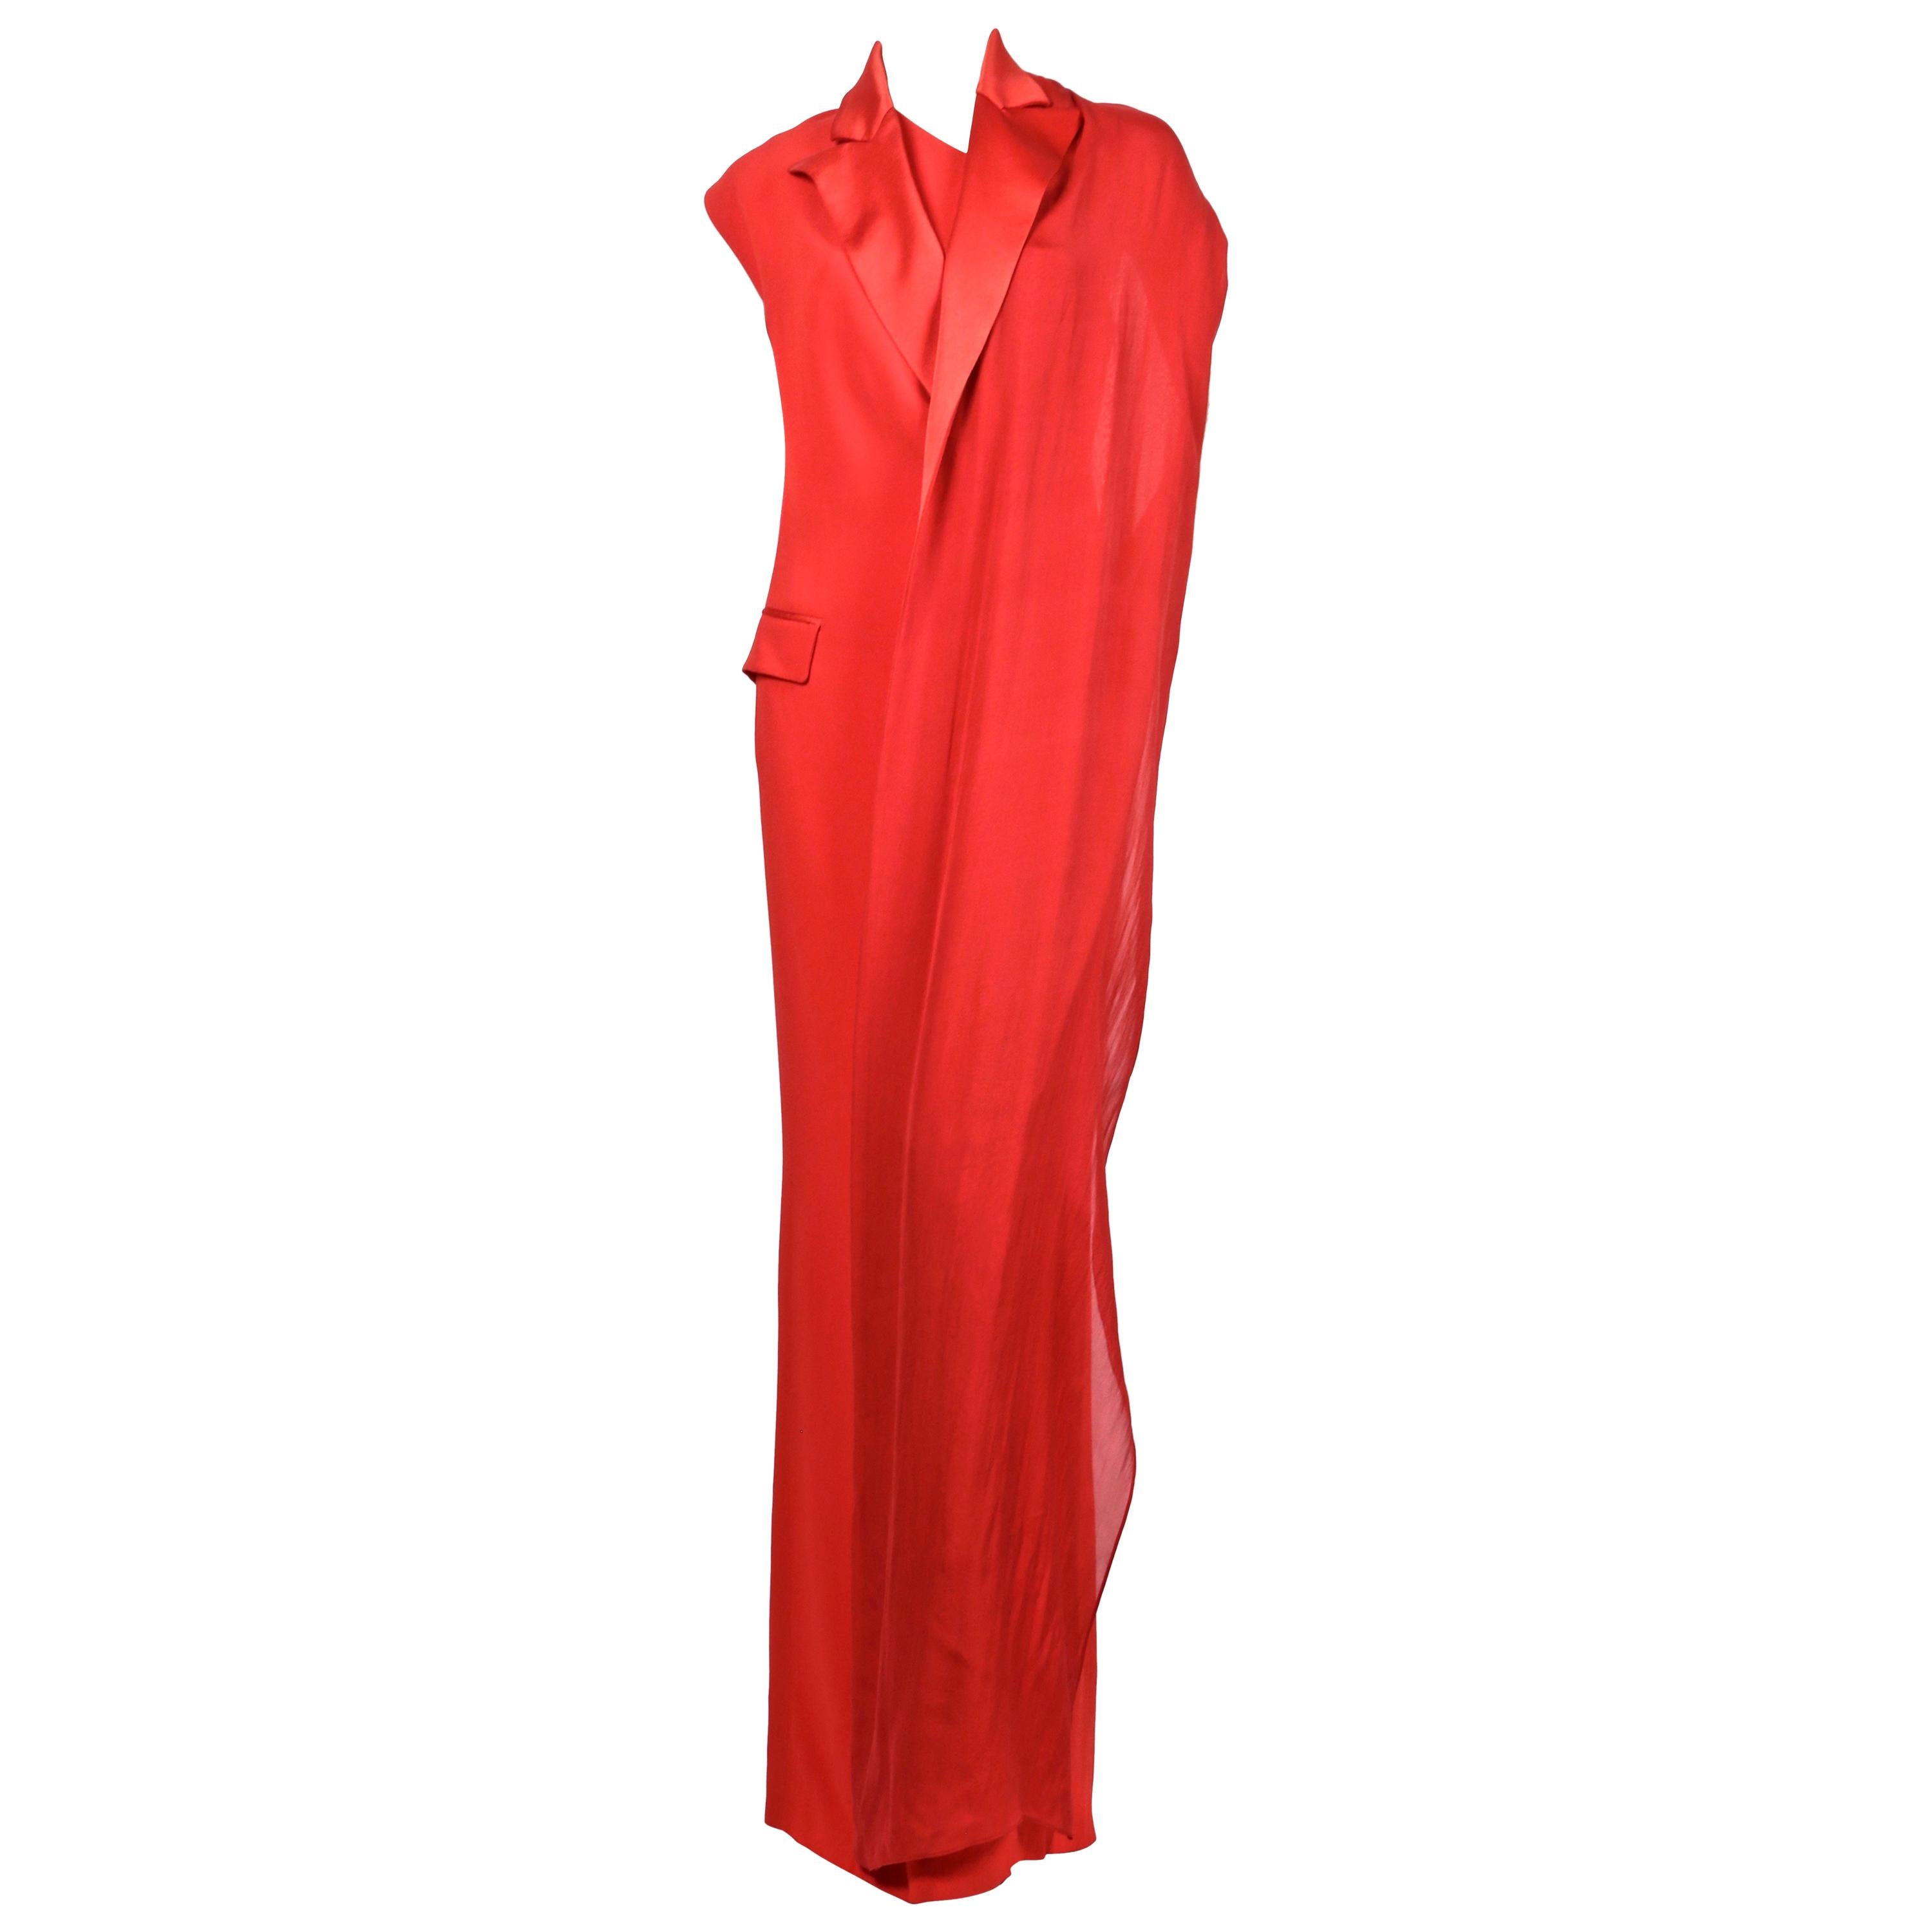 JEAN PAUL GAULTIER red tuxedo gown with draped silk scarf